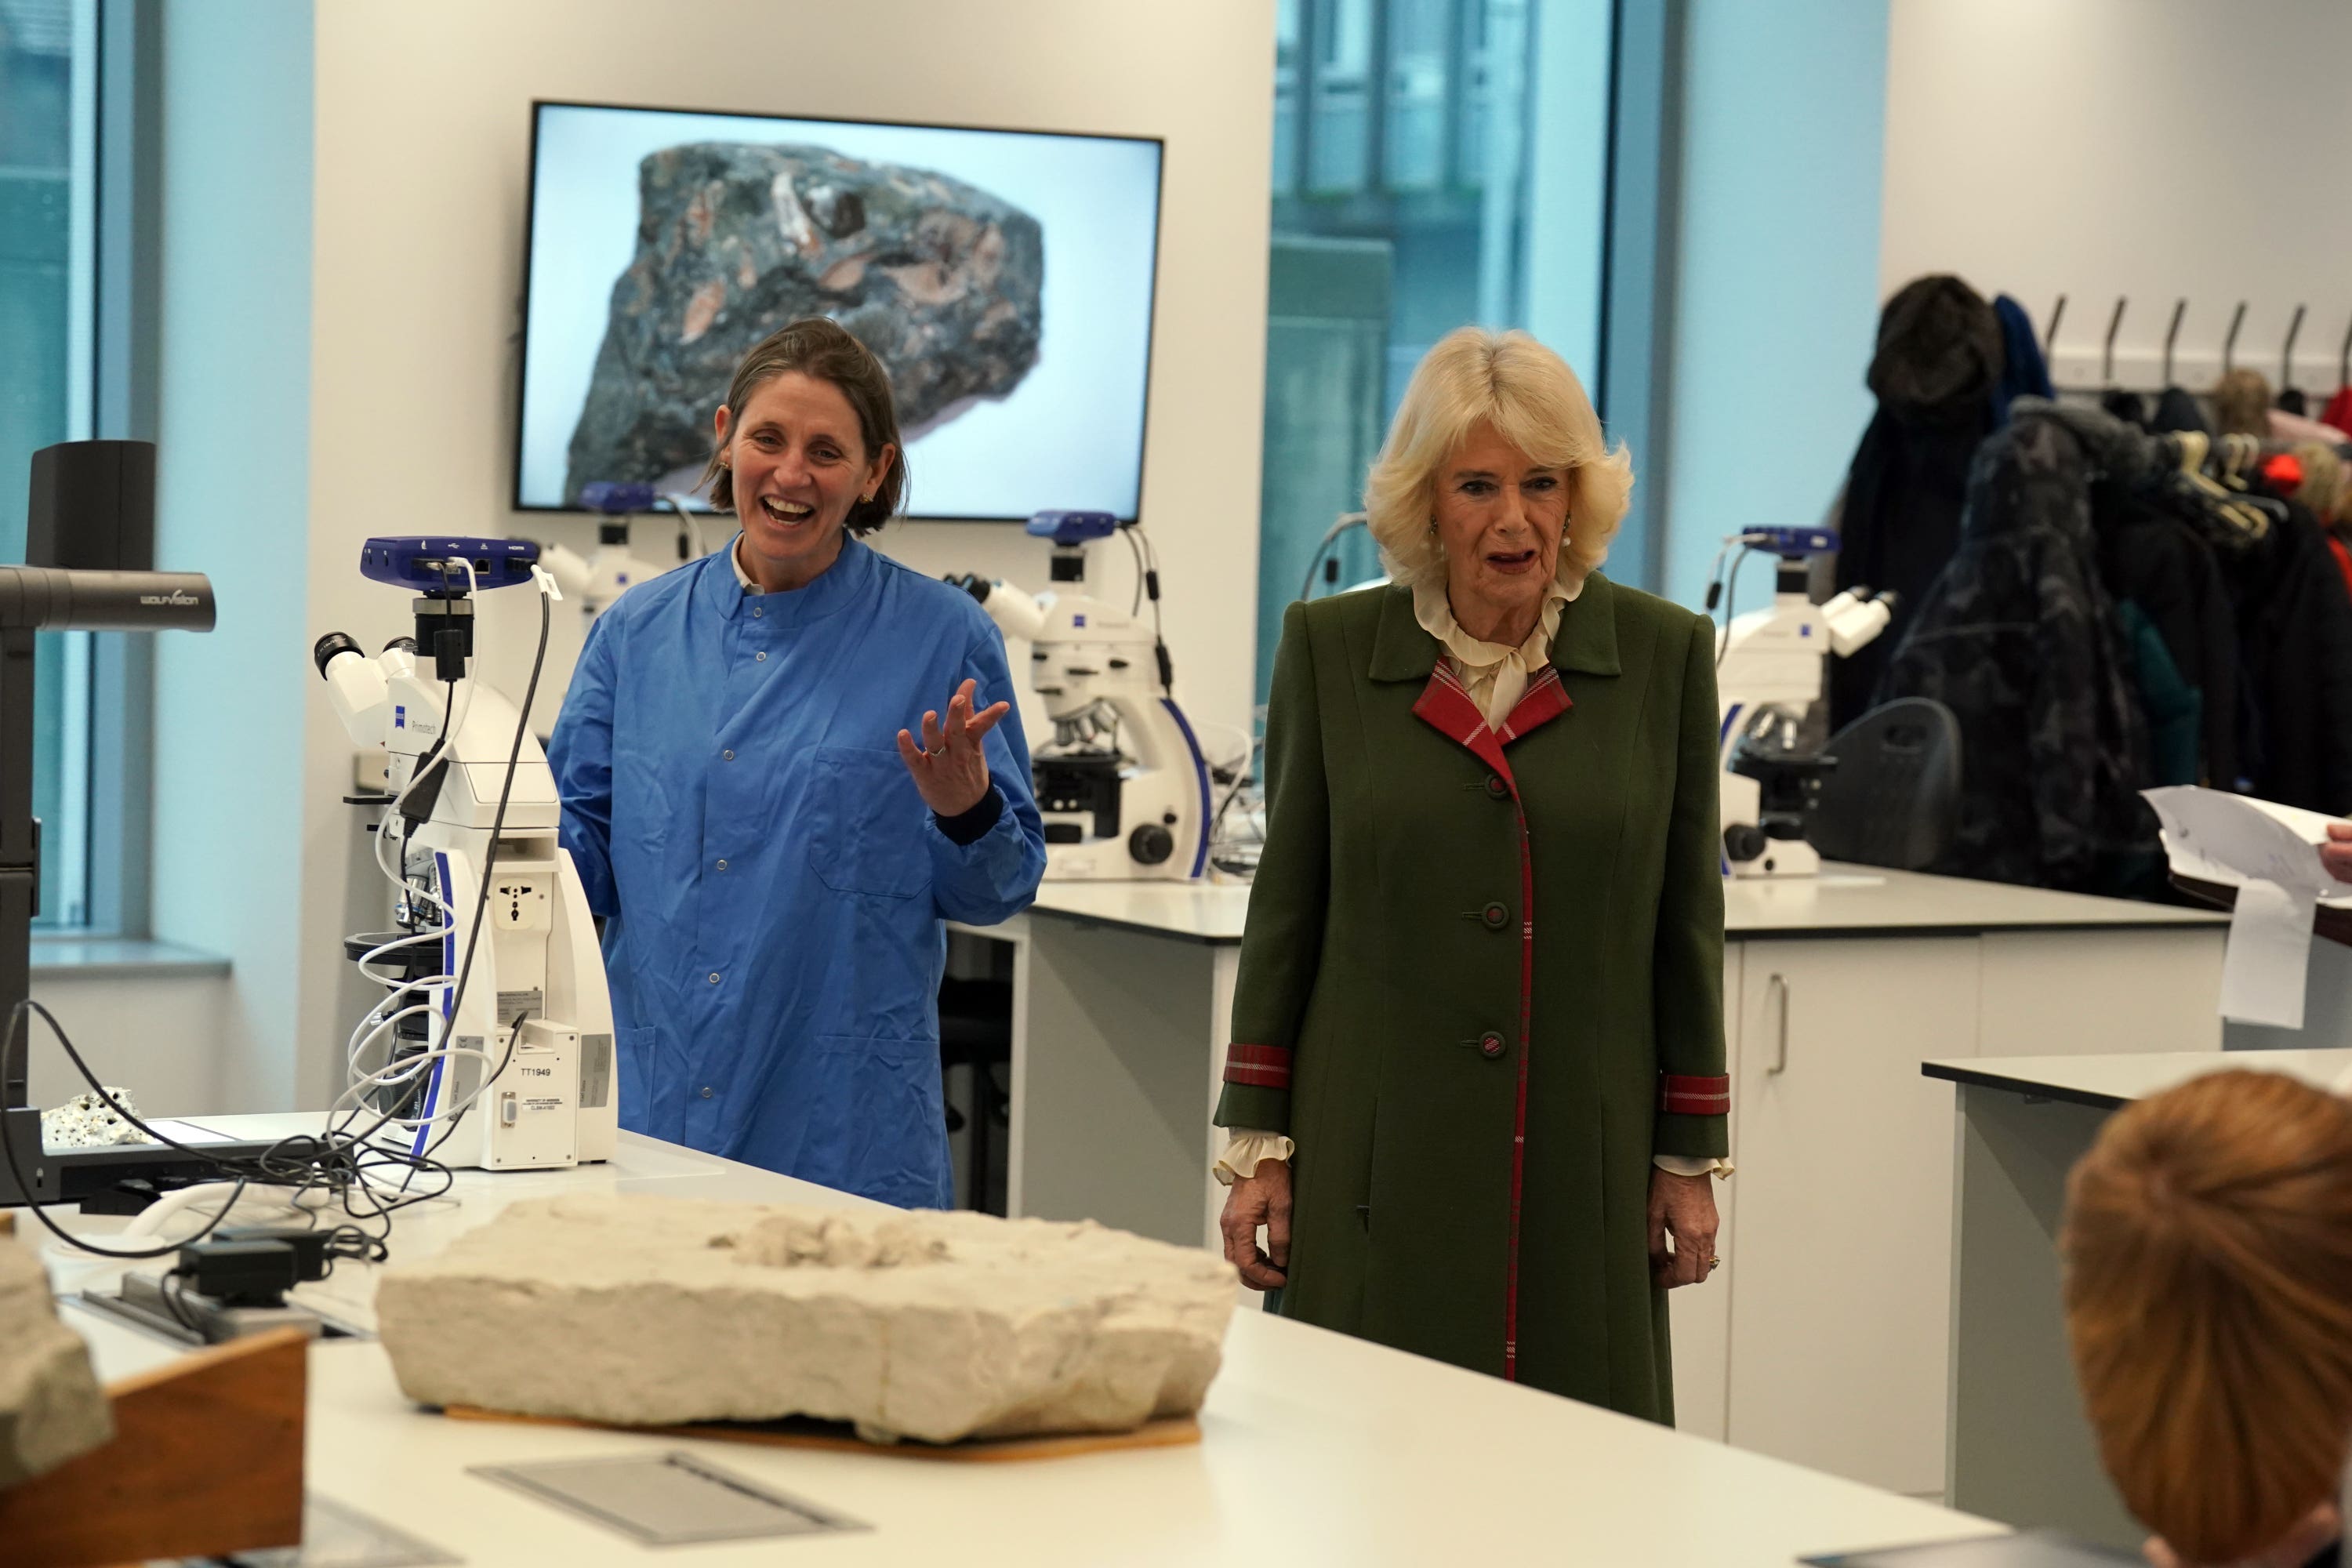 The Queen Consort met staff and students at the science teaching hub.
